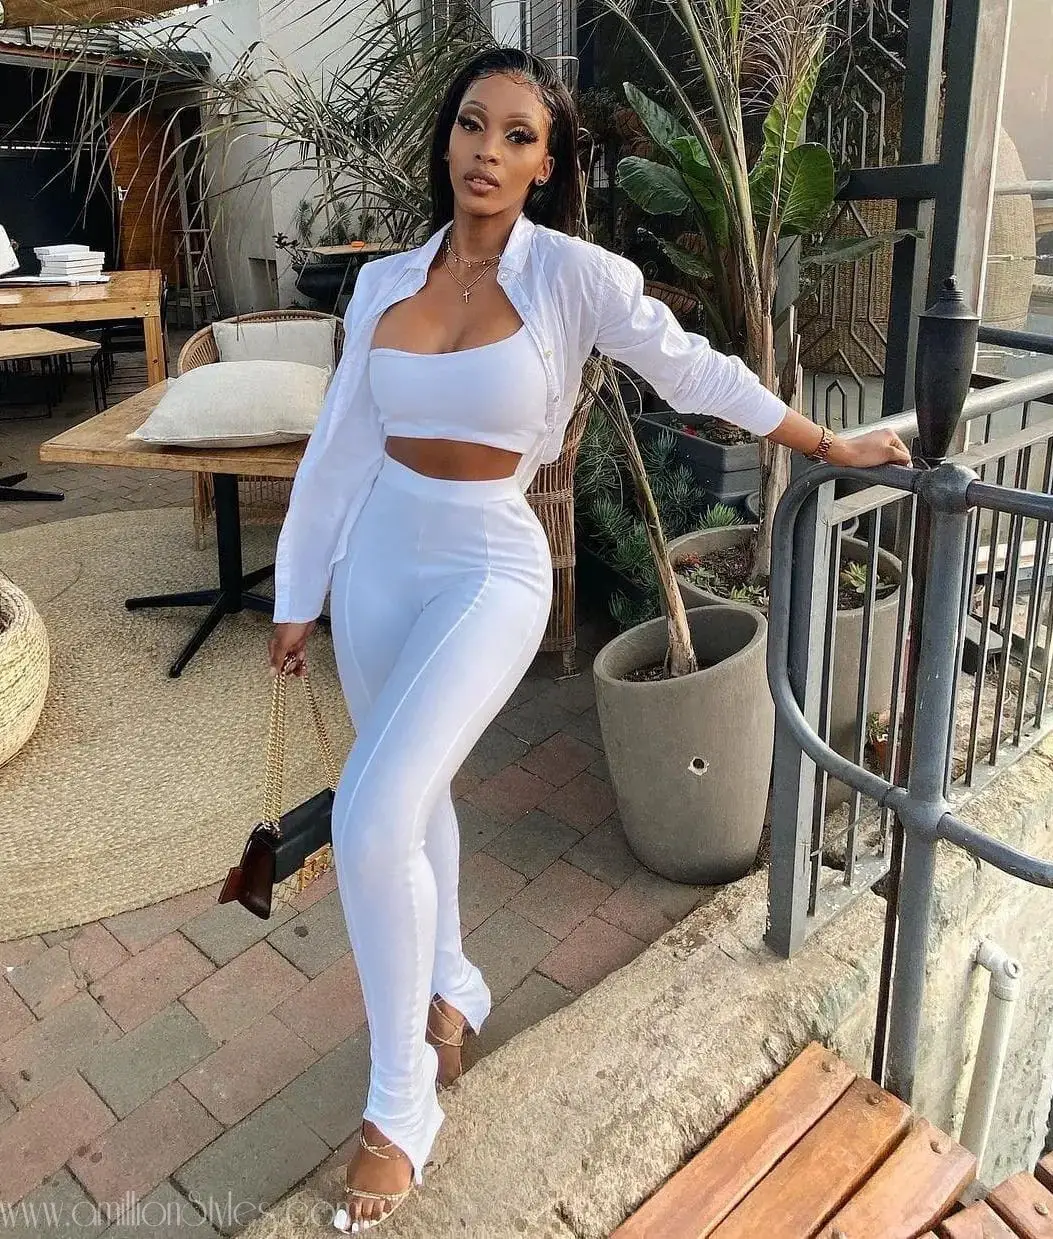 You'll Love These All White Monochrome Styles For Women